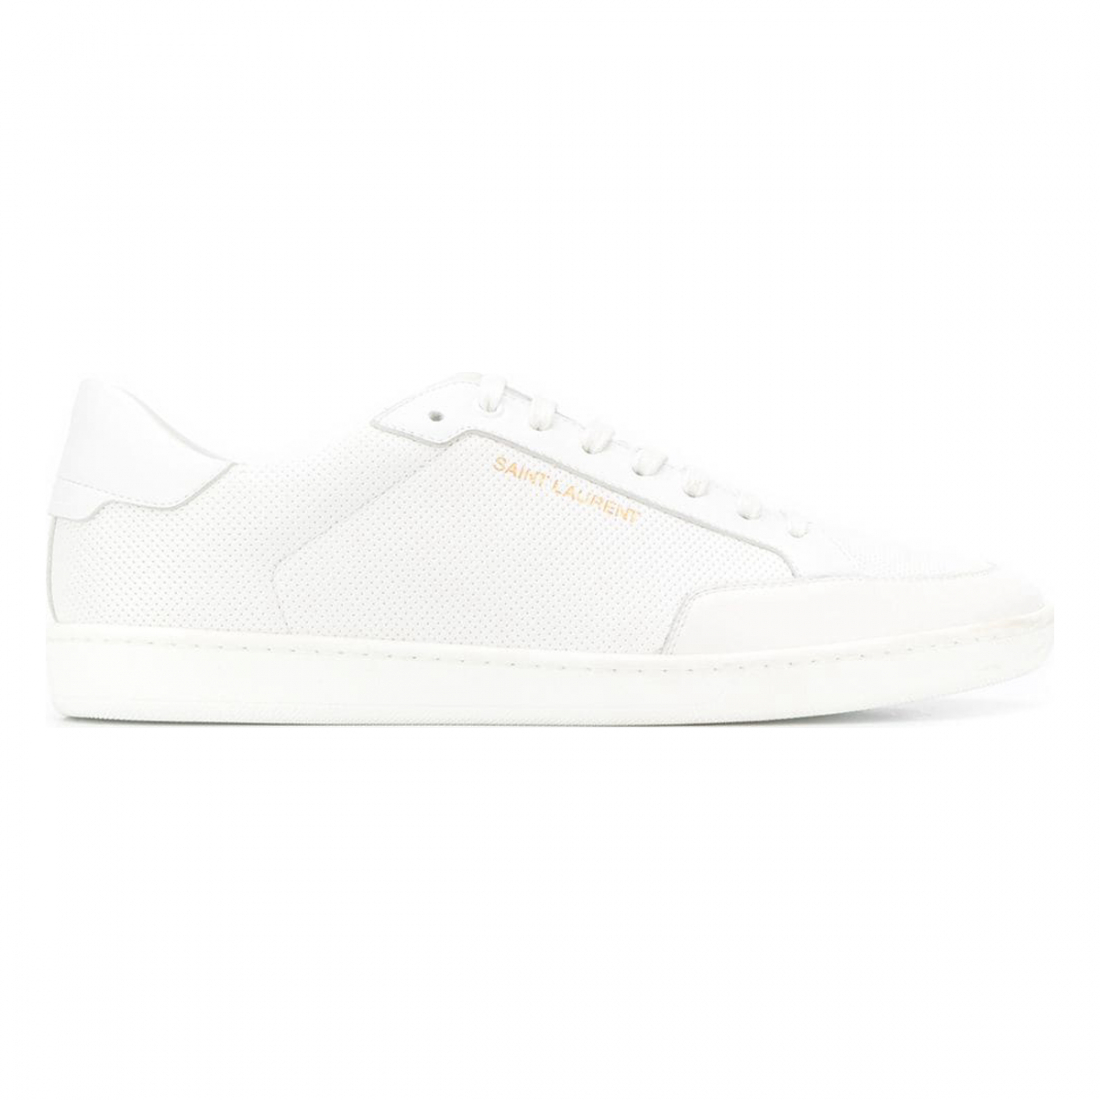 Men's 'Court Classic Sl/10 Perforated' Sneakers